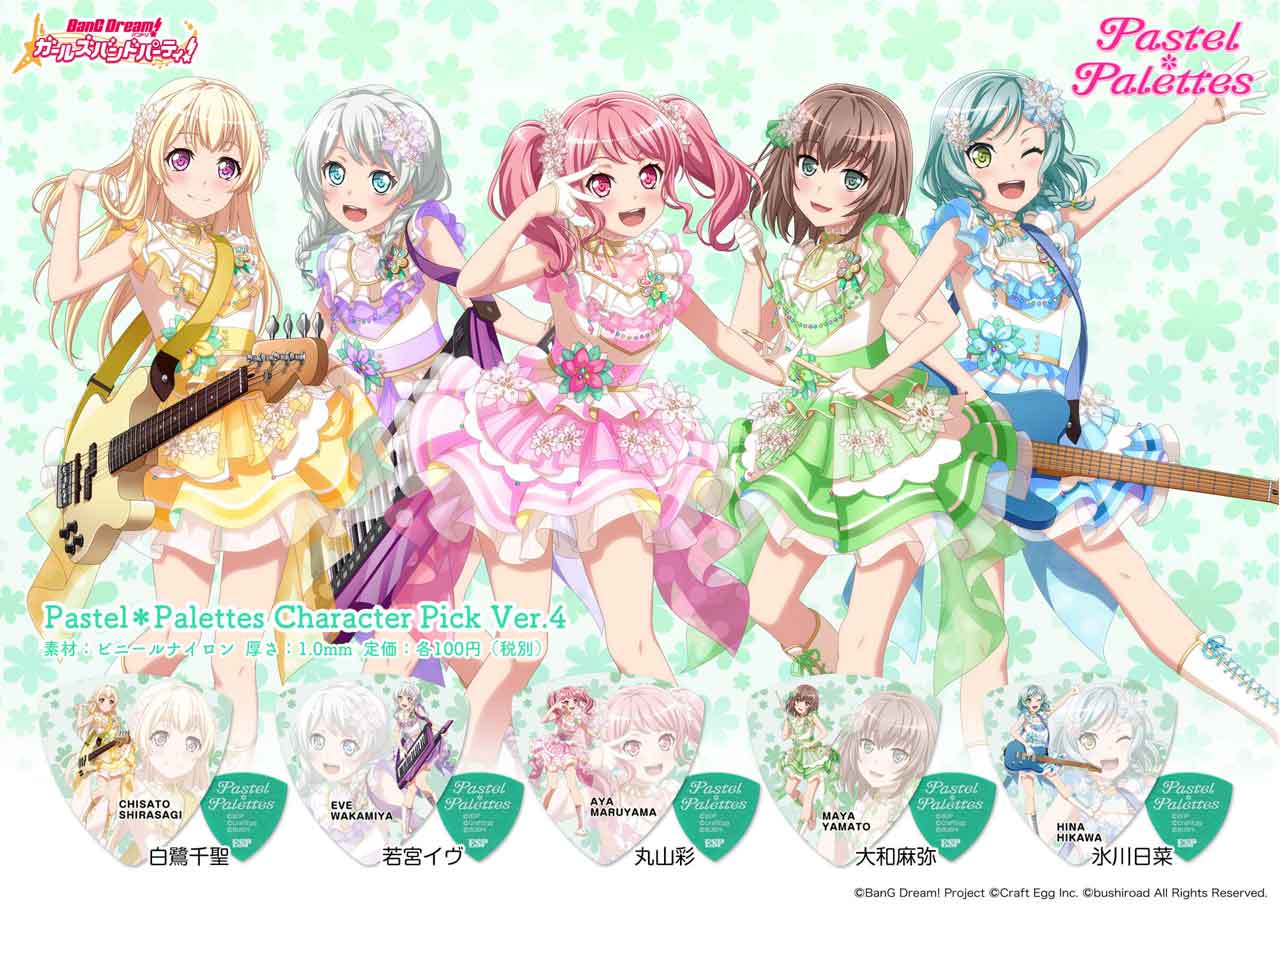 【ESP×BanG Dream!コラボピック】Pastel*Palettes Character Pick Ver.4 "若宮イヴ"10枚セット（GBP EVE PASTEL PALETTES 4）